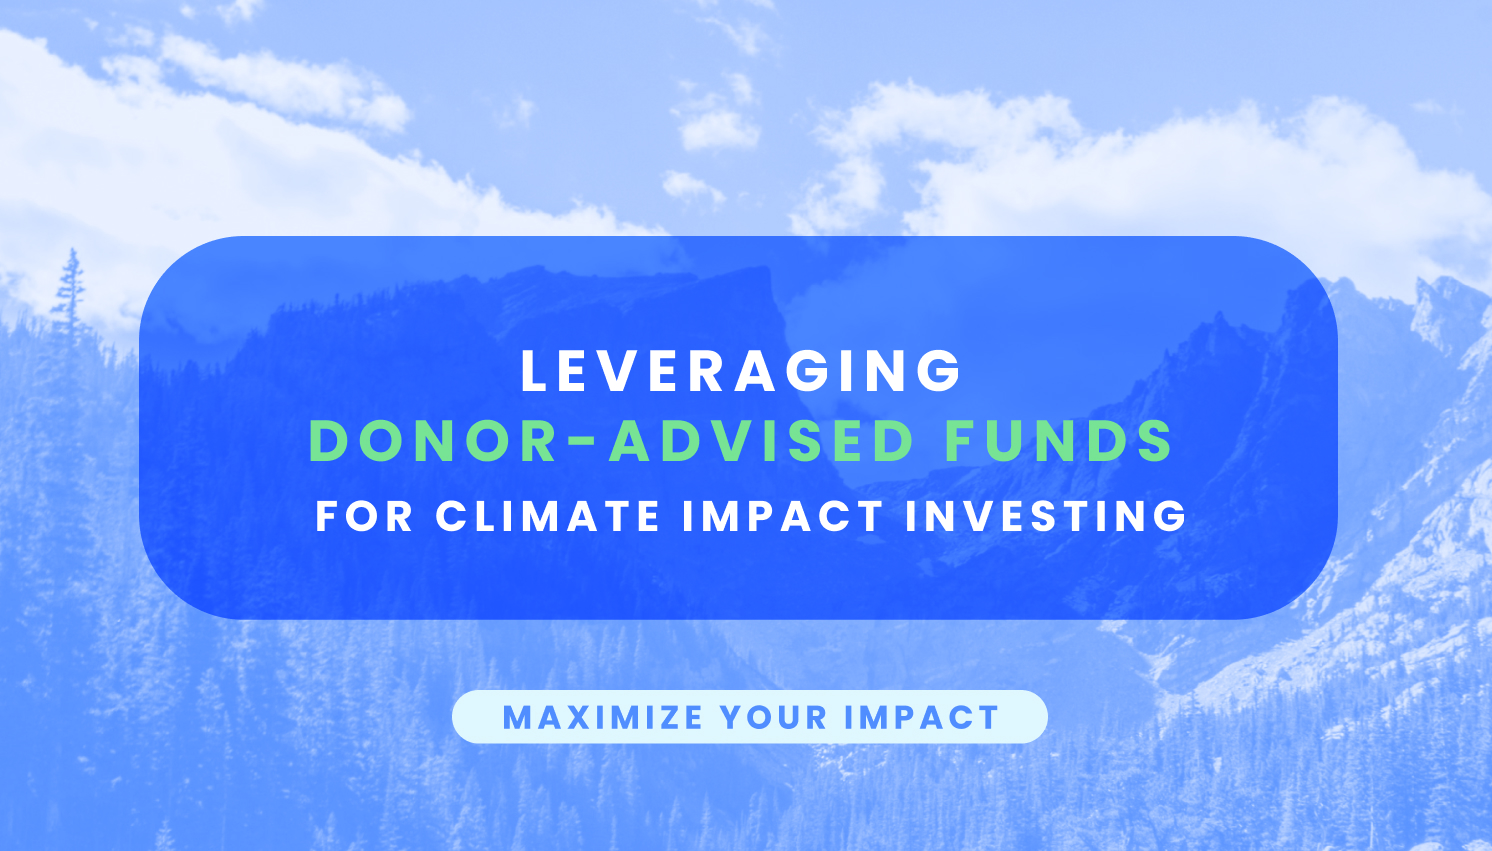 Leveraging Donor Advised Funds (DAFs) for Climate Impact Investing